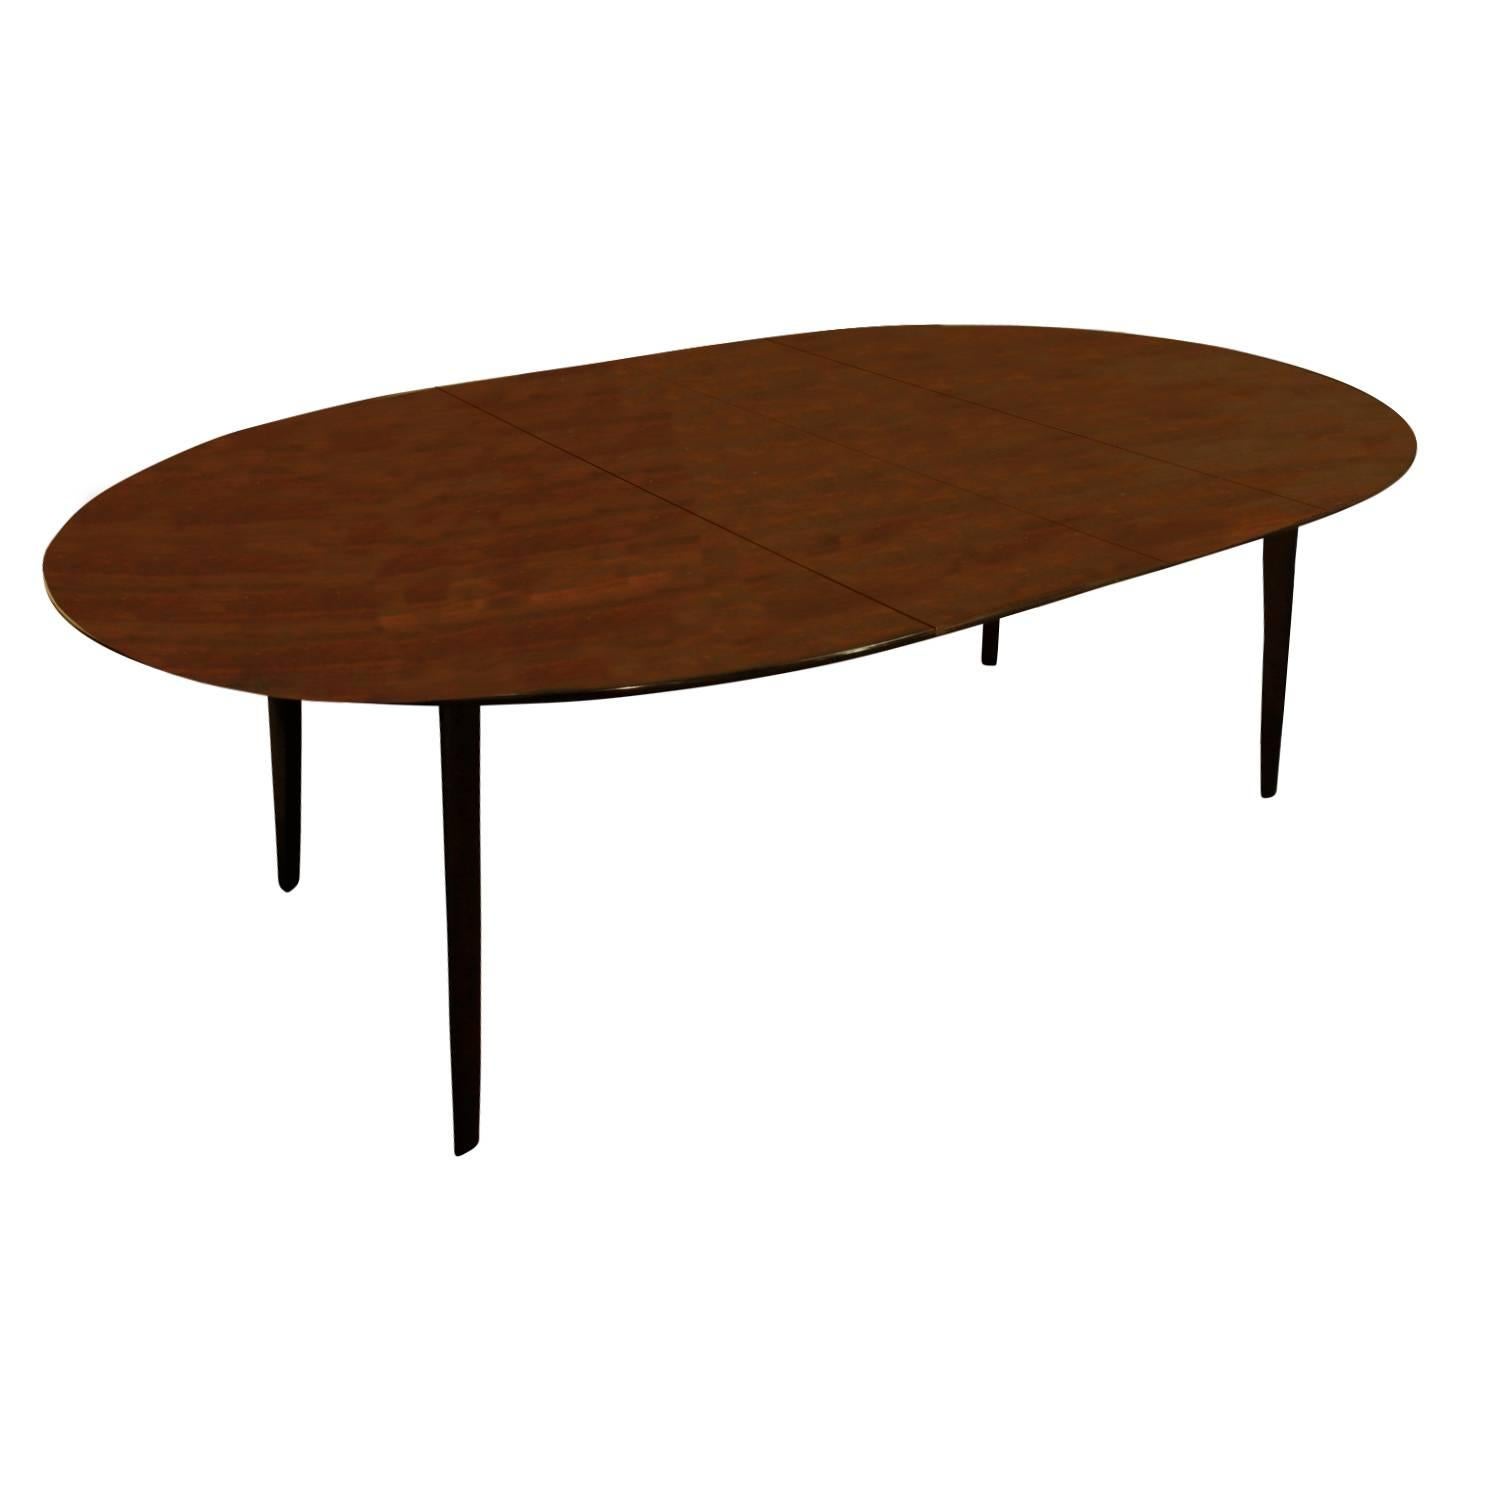 Dining table in walnut with two leaves, angular leg design, by Edward Wormley for Dunbar, American, 1950s (signed with Dunbar metal label on bottom).

Without leaves: W 60 inches.